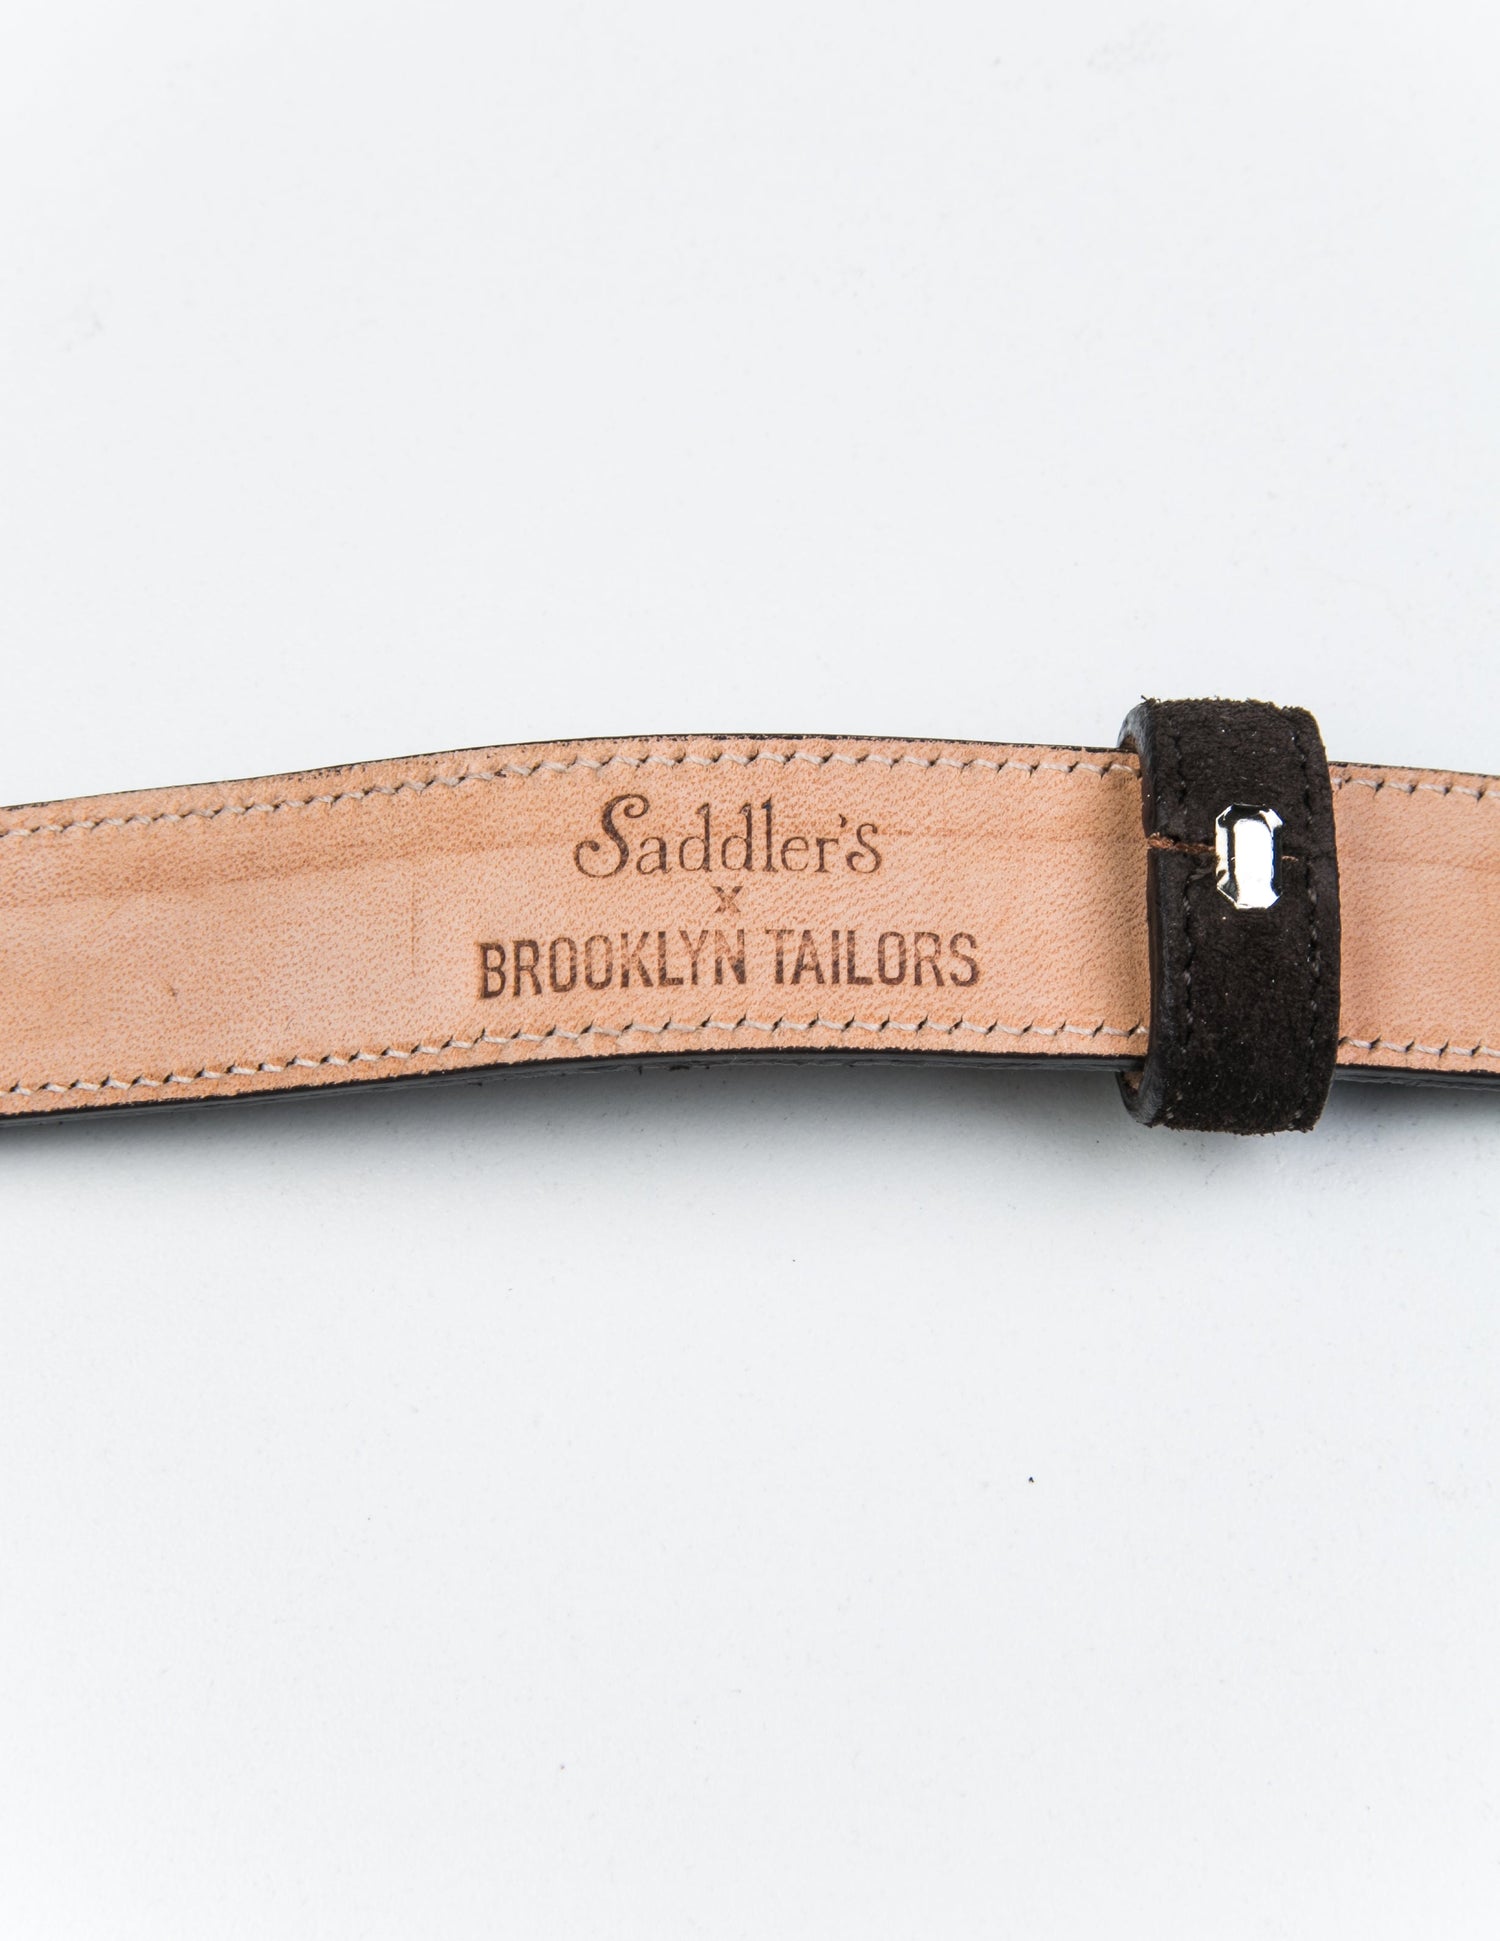 Detail of the Saddler's x Brooklyn Tailors x Saddler's stamp on the underside of 25mm Belt in Suede Leather - Deep Brown